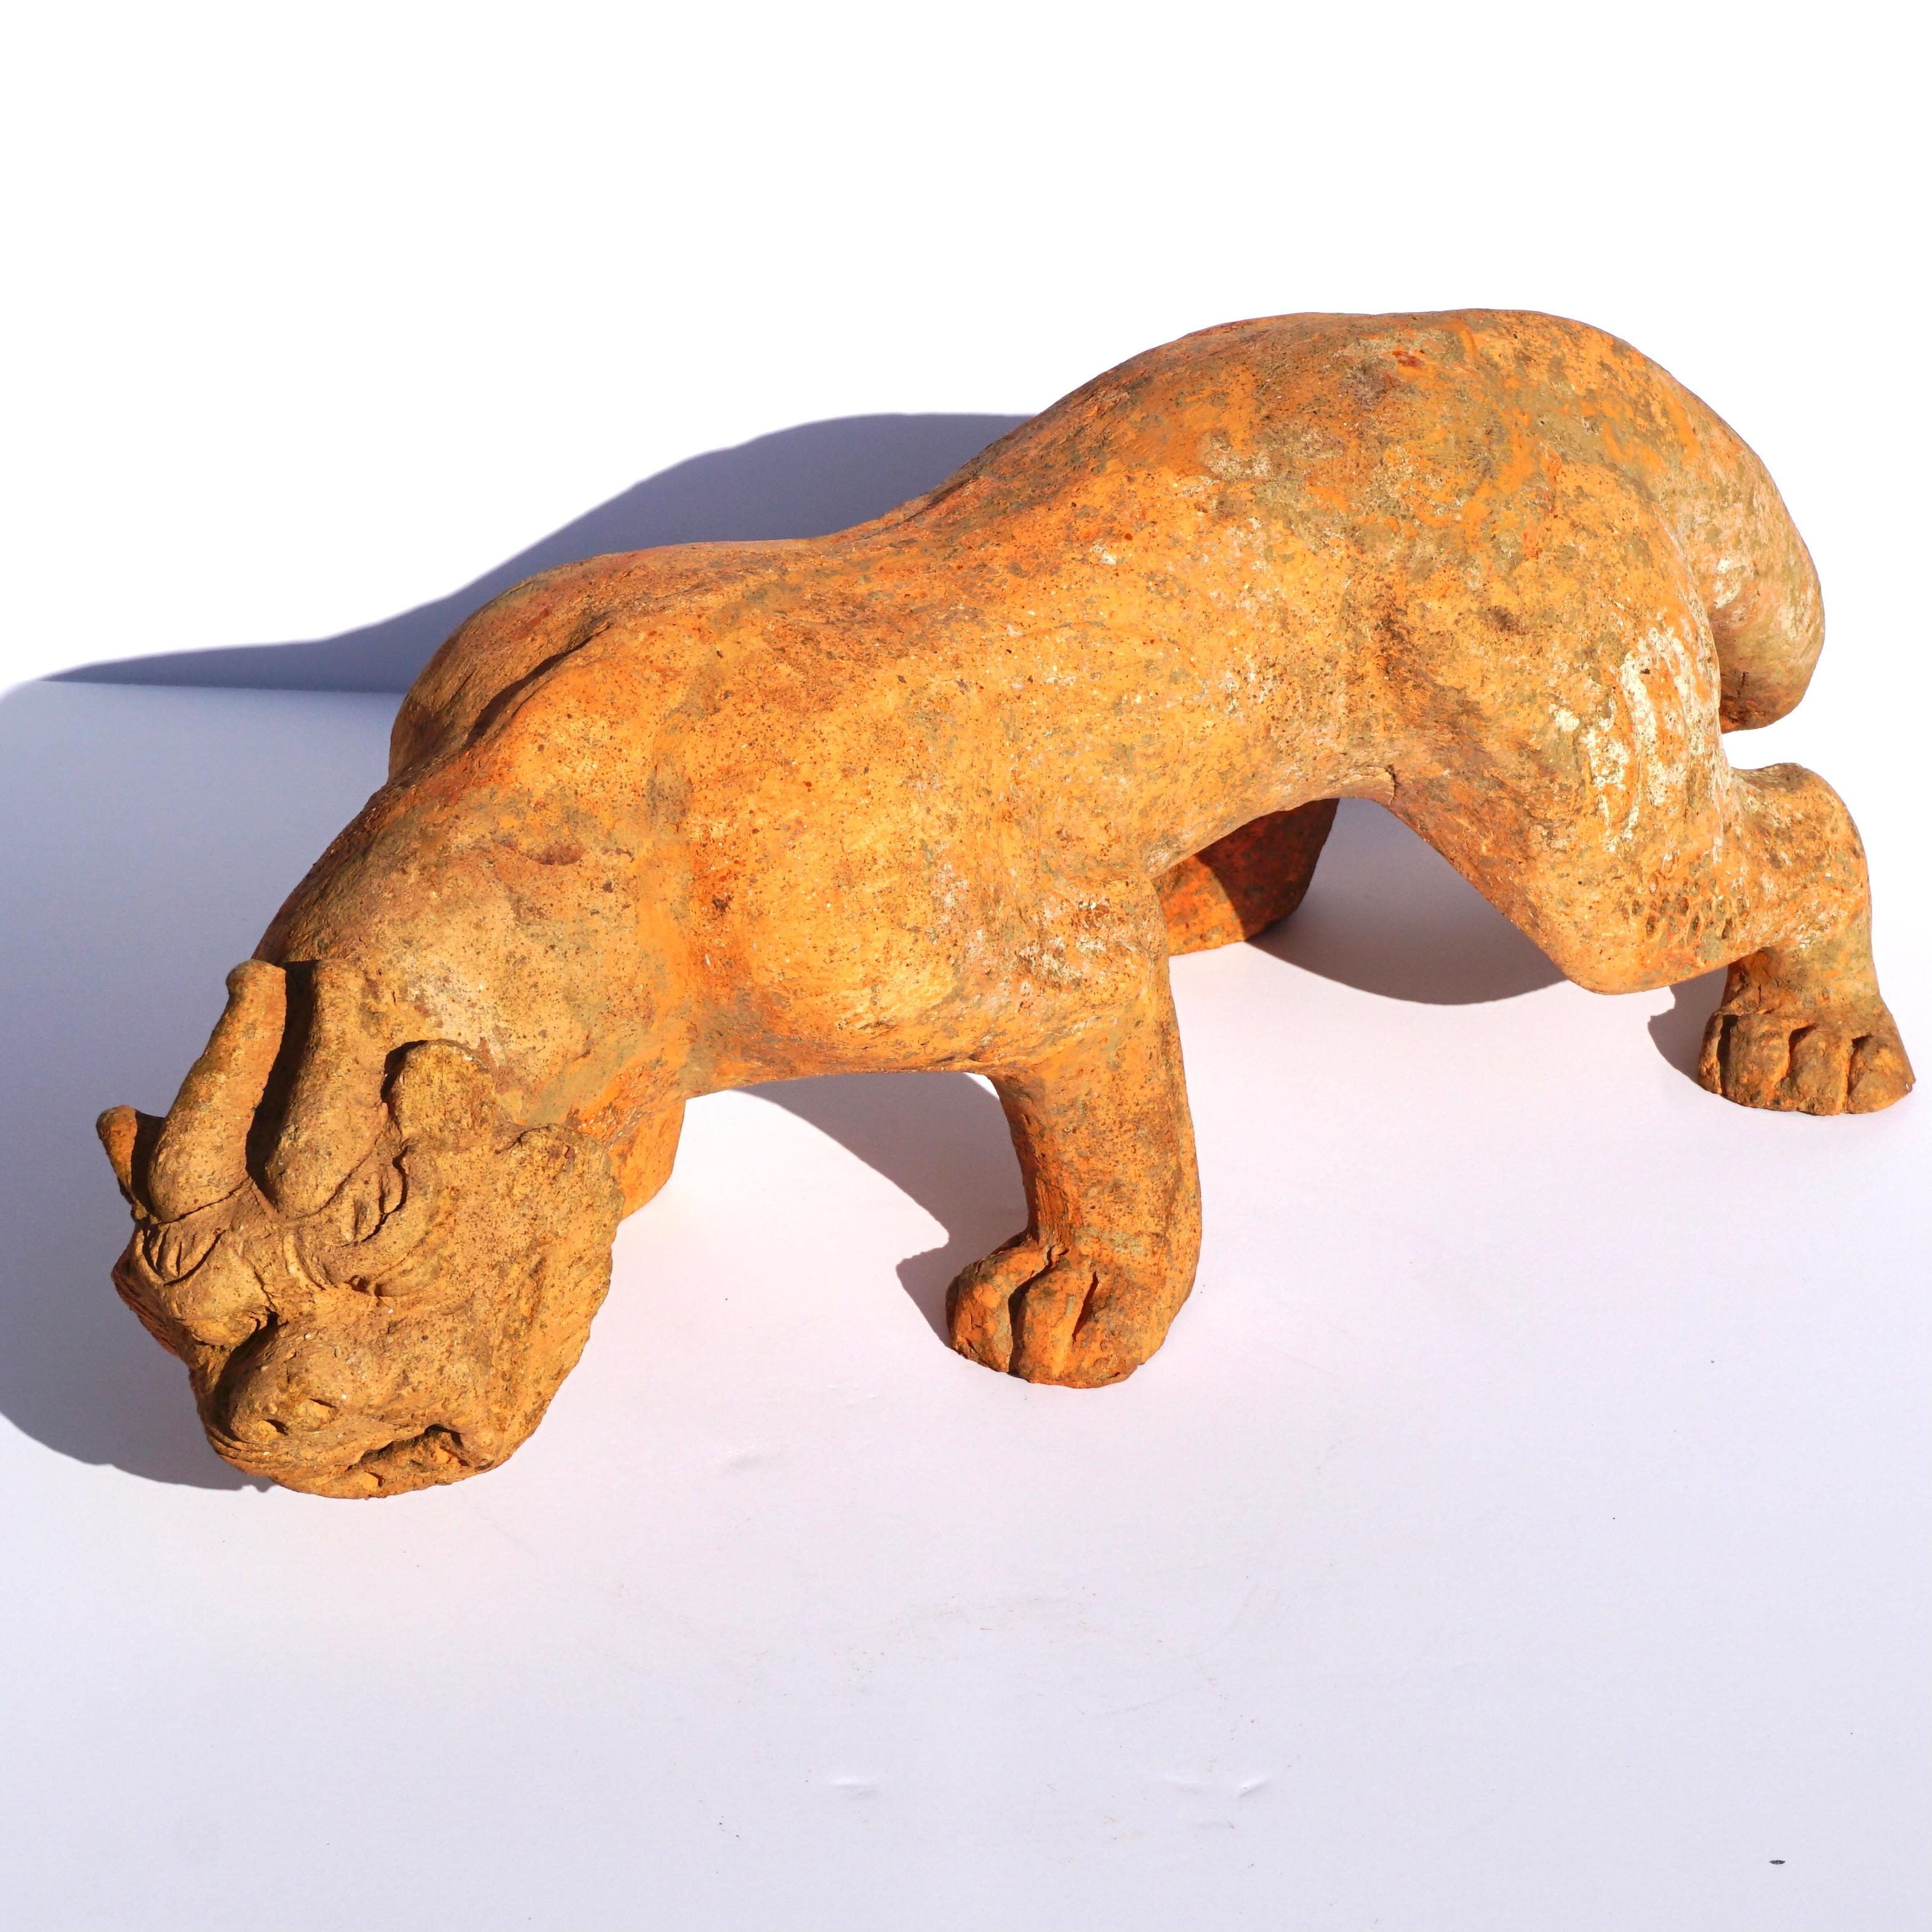 Chinese Han Dynasty Pottery Sculpture of a Winged Lion Bixie Mythical Beast TL Tested For Sale